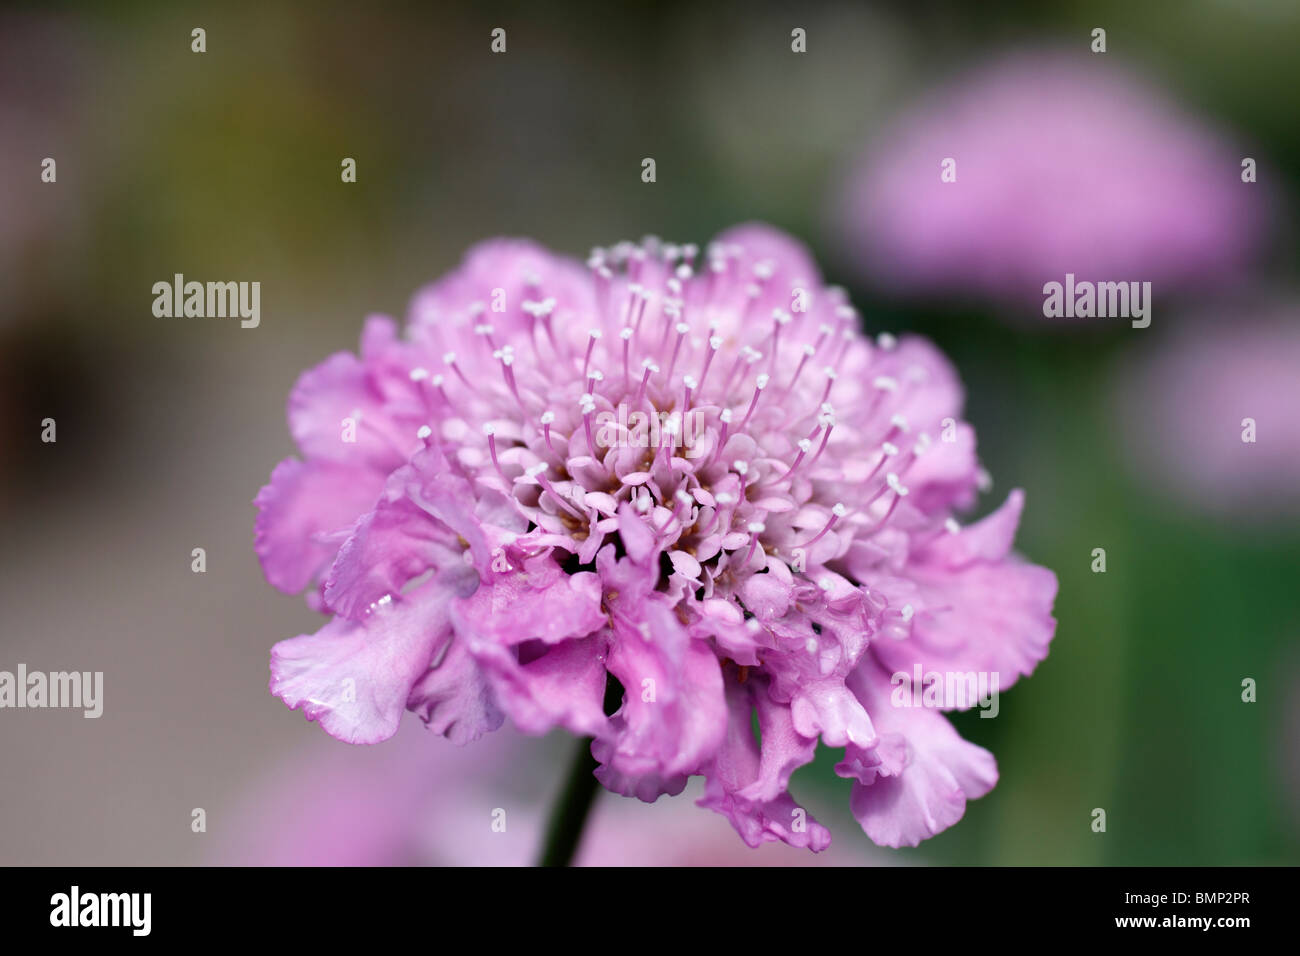 Scabiosa columbaria 'Pink Mist' Small scabious, 'Pink Mist' Scabiosa 'Butterfly Pink', Scabiosa 'Pink Mist' 'Pink Mist' is an upright, branched deciduous perennial with linear or lobed grey-green leaves and pink flowers with paler centres in summer and early autumn. Stock Photo